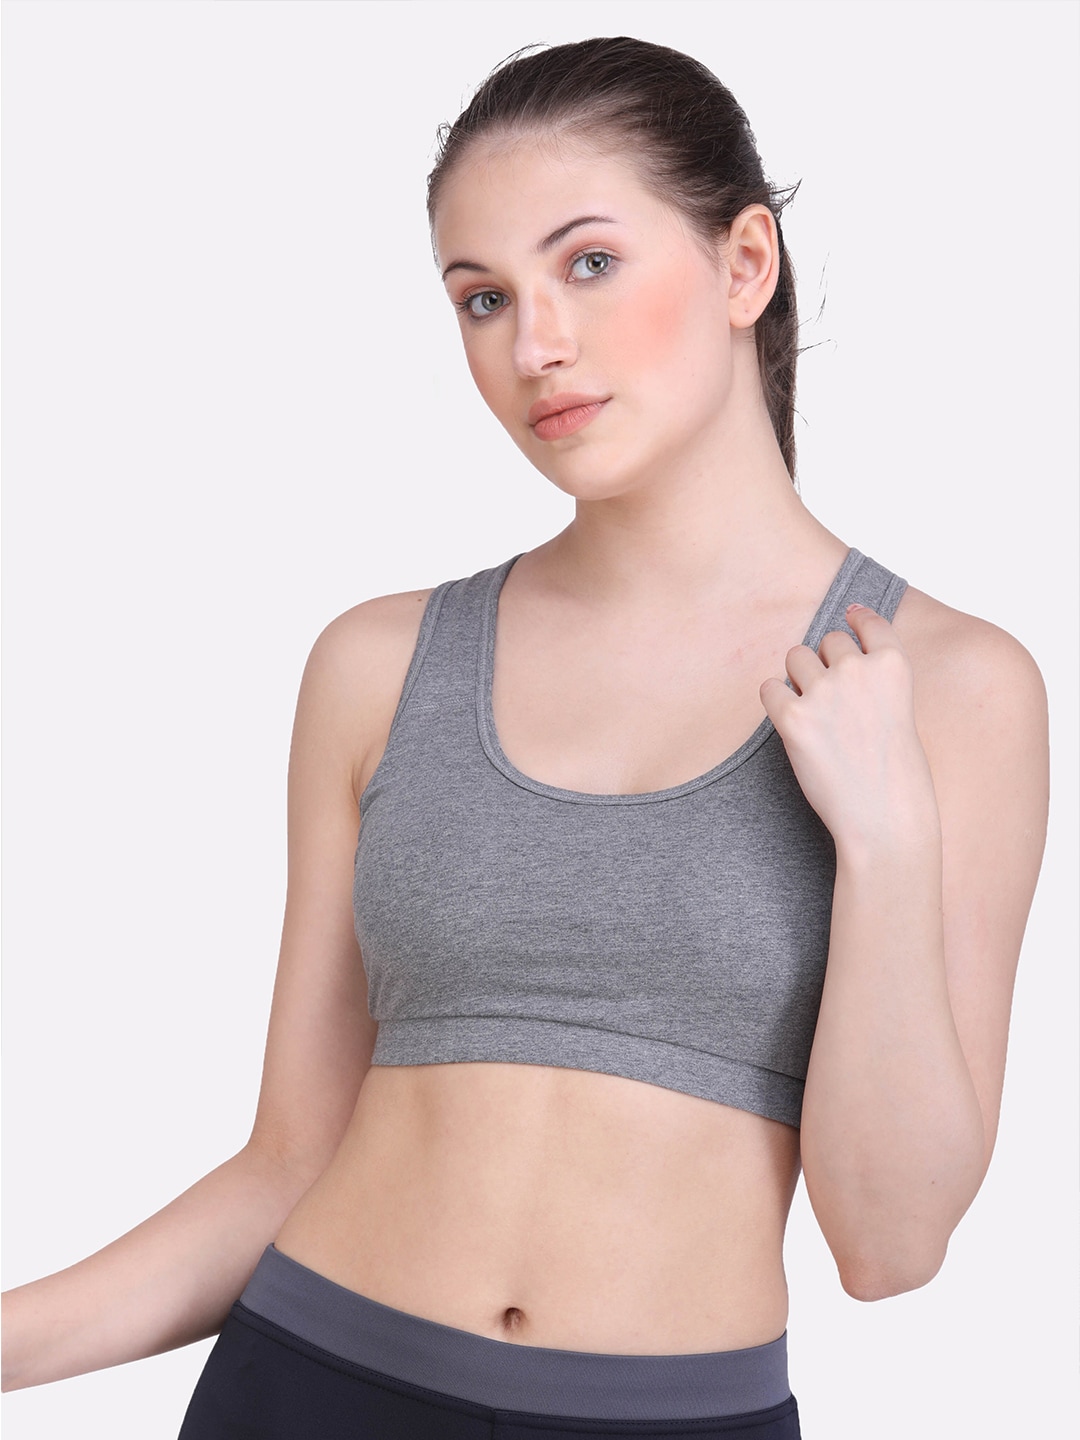 LAASA SPORTS Grey Dry Fit Cotton Workout Bra Price in India